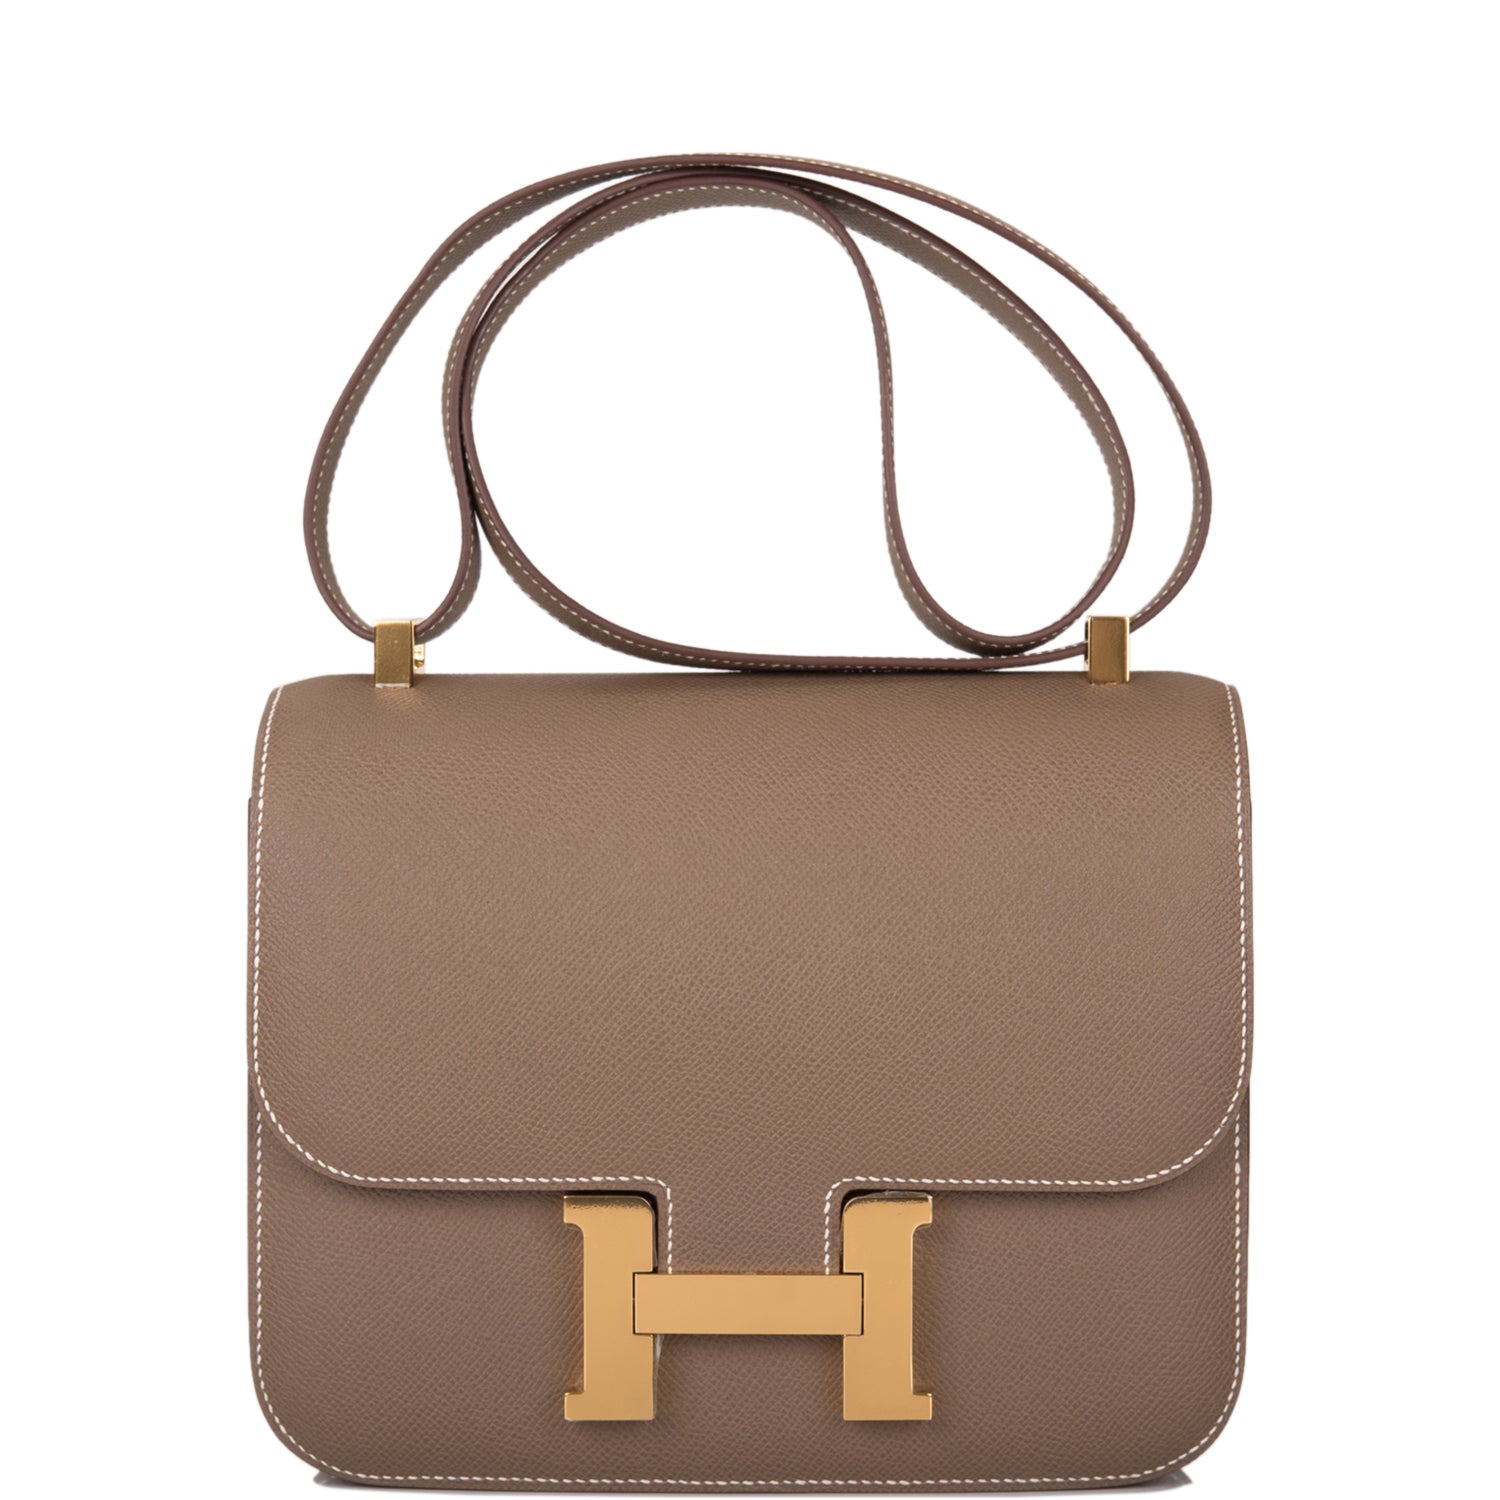 How Much Do Hermes Bags Cost? From The 